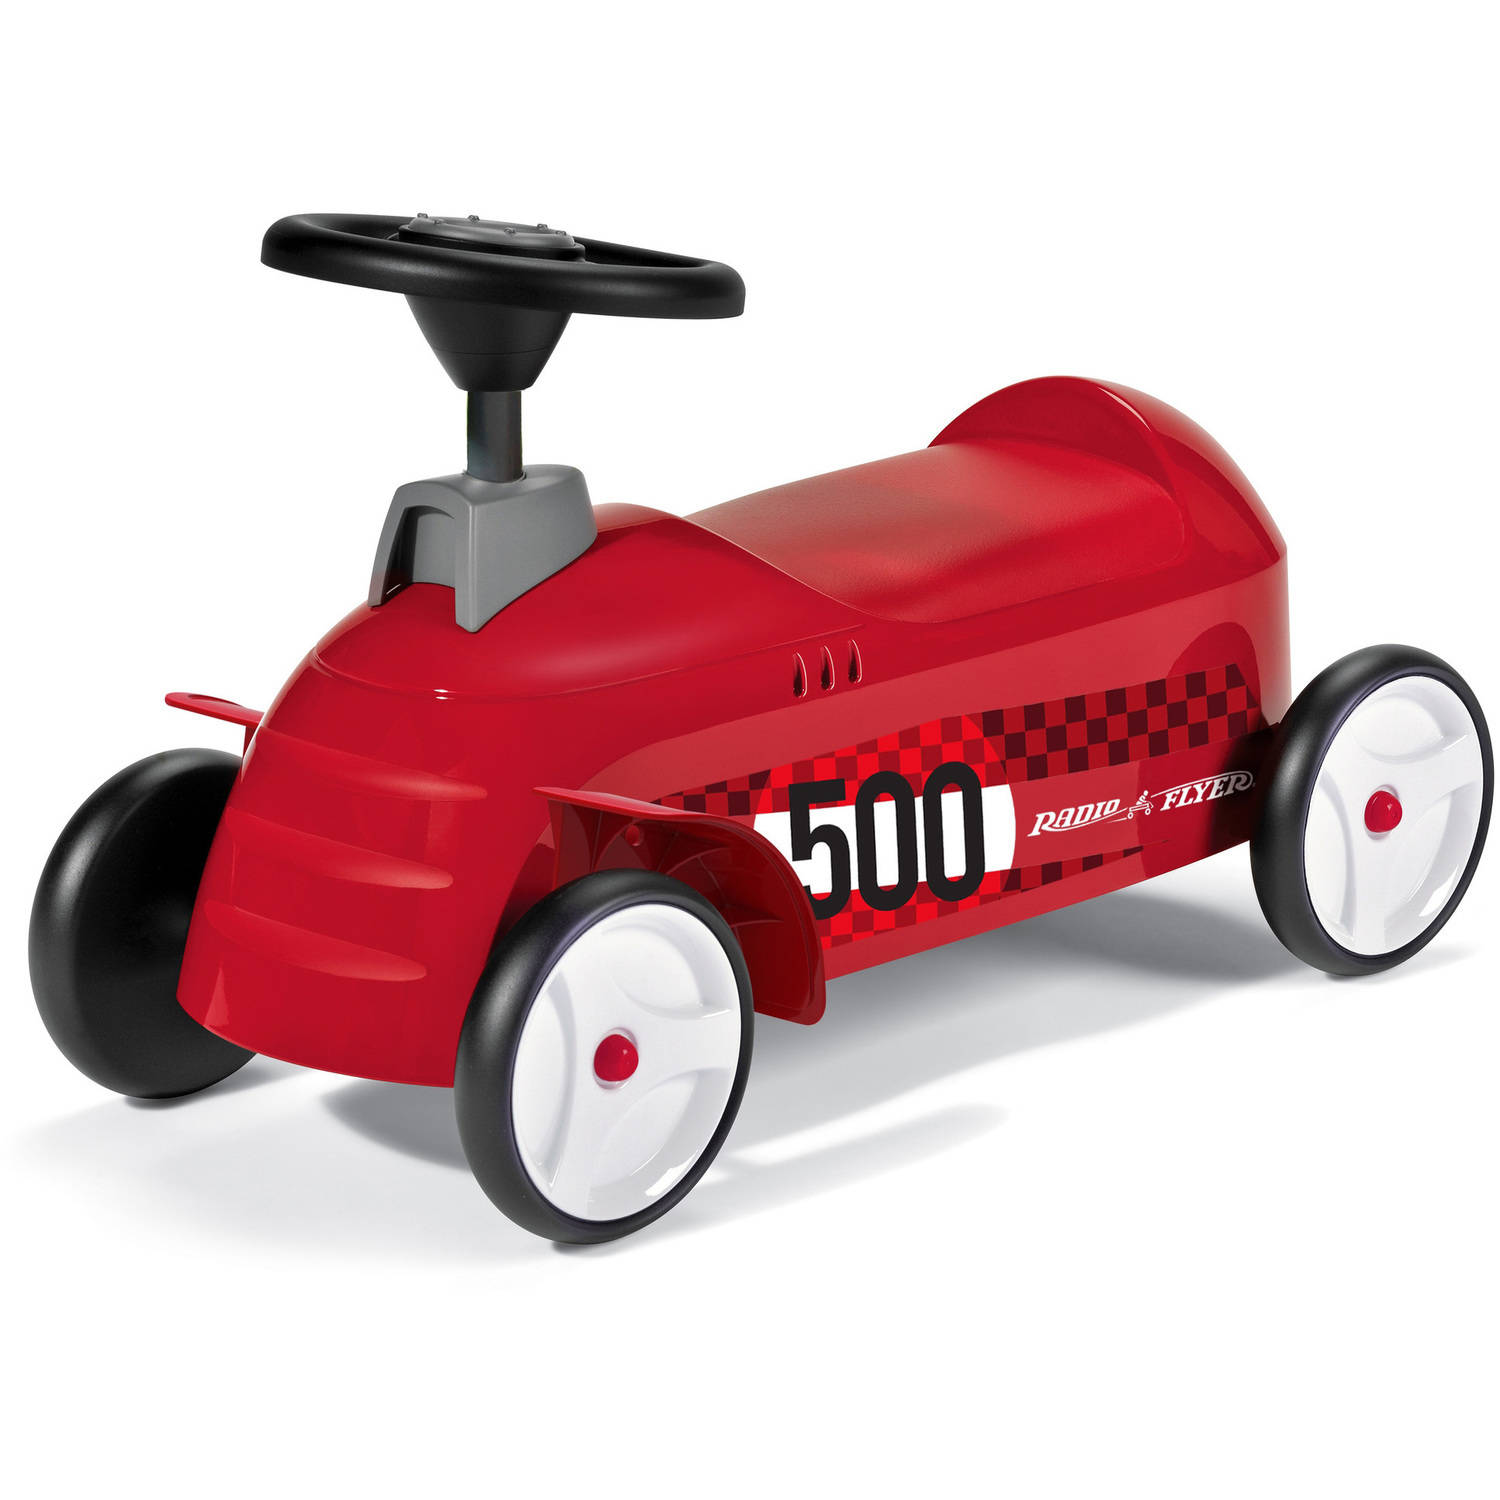 Radio Flyer, Flyer 500 Ride-on with Ramp and Car, Red - image 5 of 8